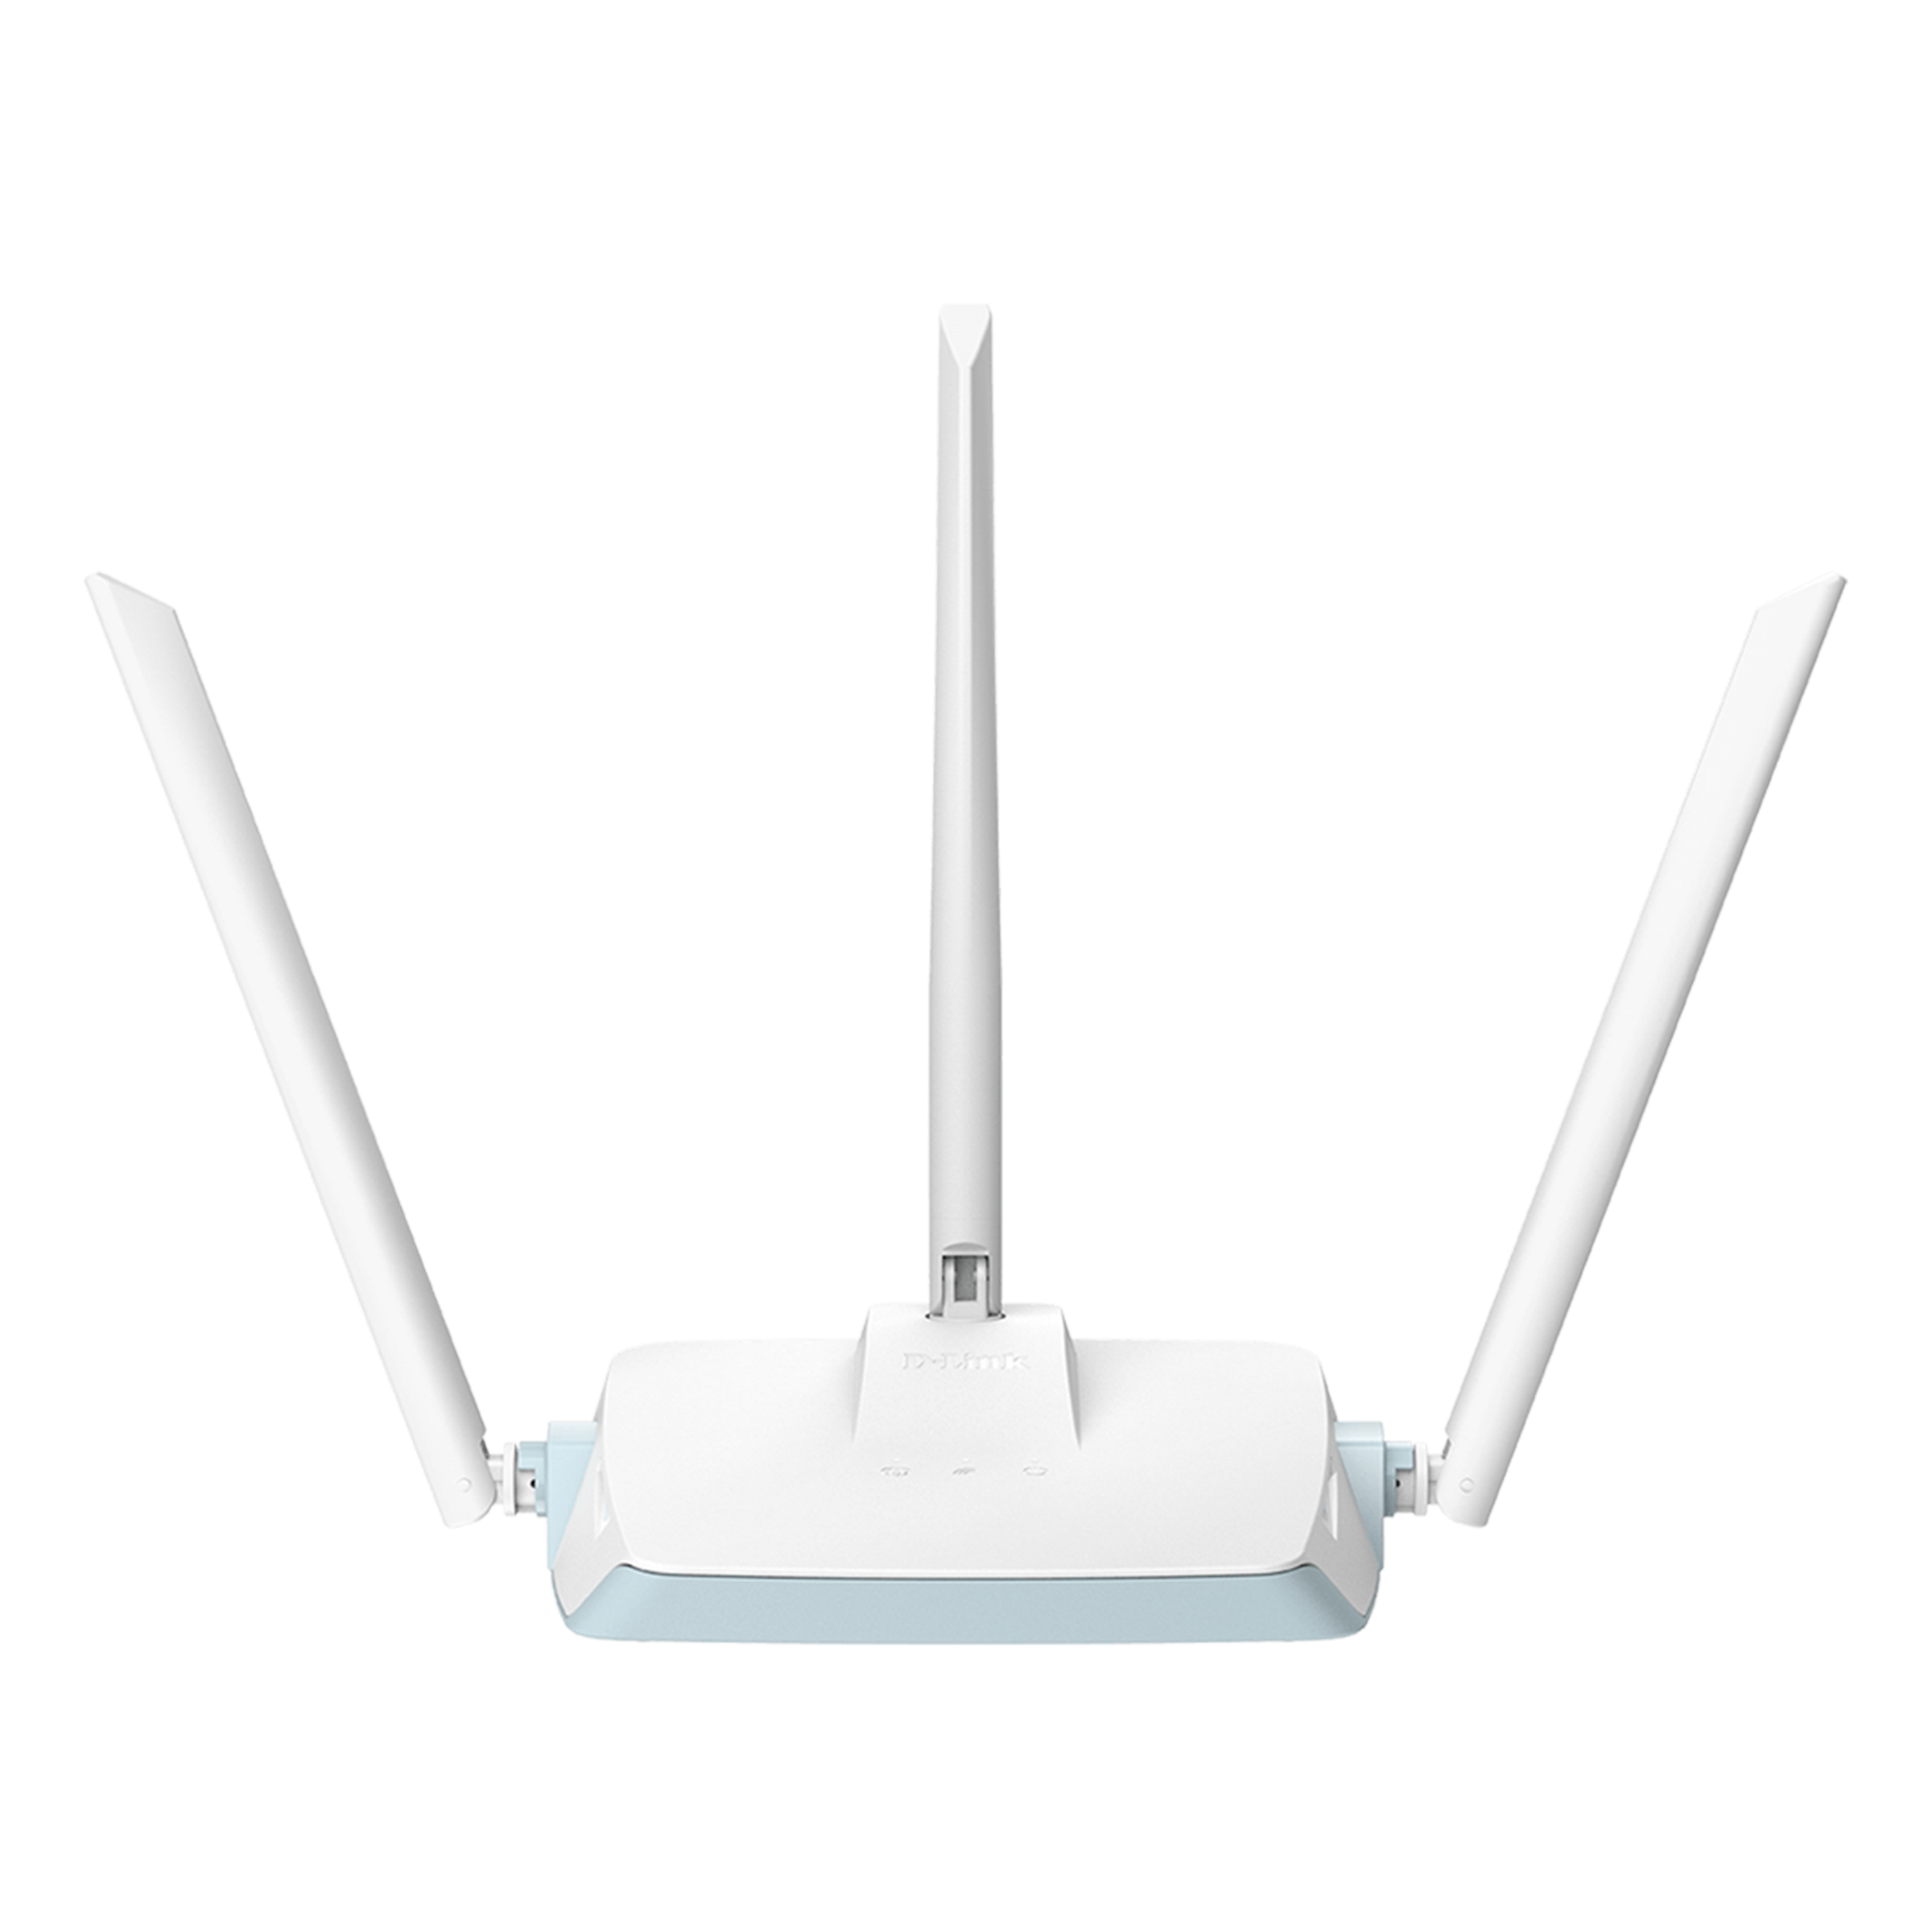 D-Link N300 Single Band 300 Mbps WiFi Smart Router (3 Antennas, 4 LAN Ports, Voice Assistant Supported, R04, White)_1